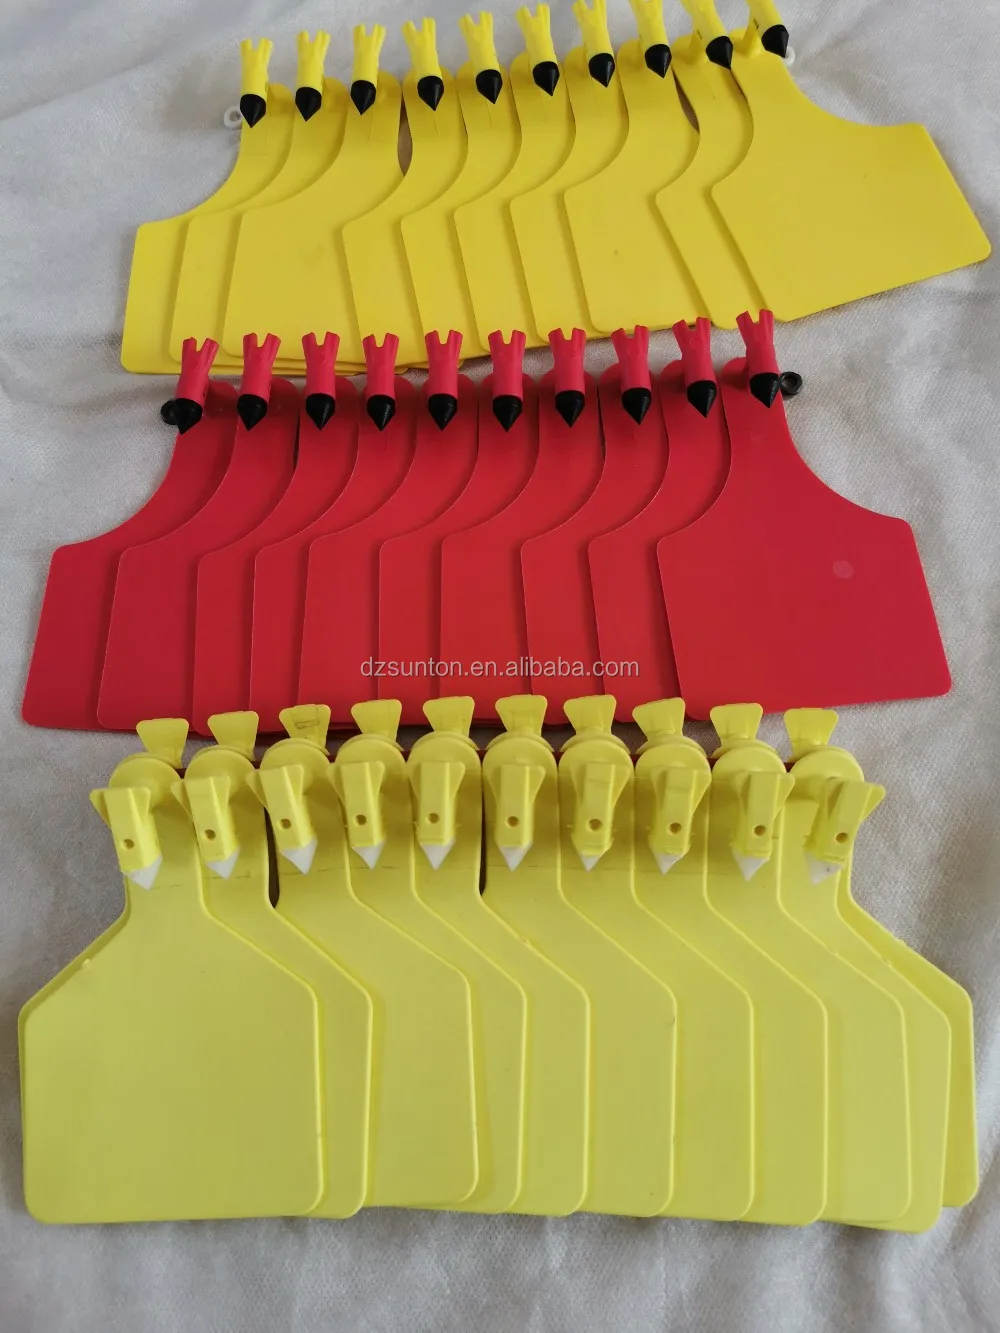 2020 Top sales TPU Plastic Cattle Ear Tags For Livestock Farming Hang Tags